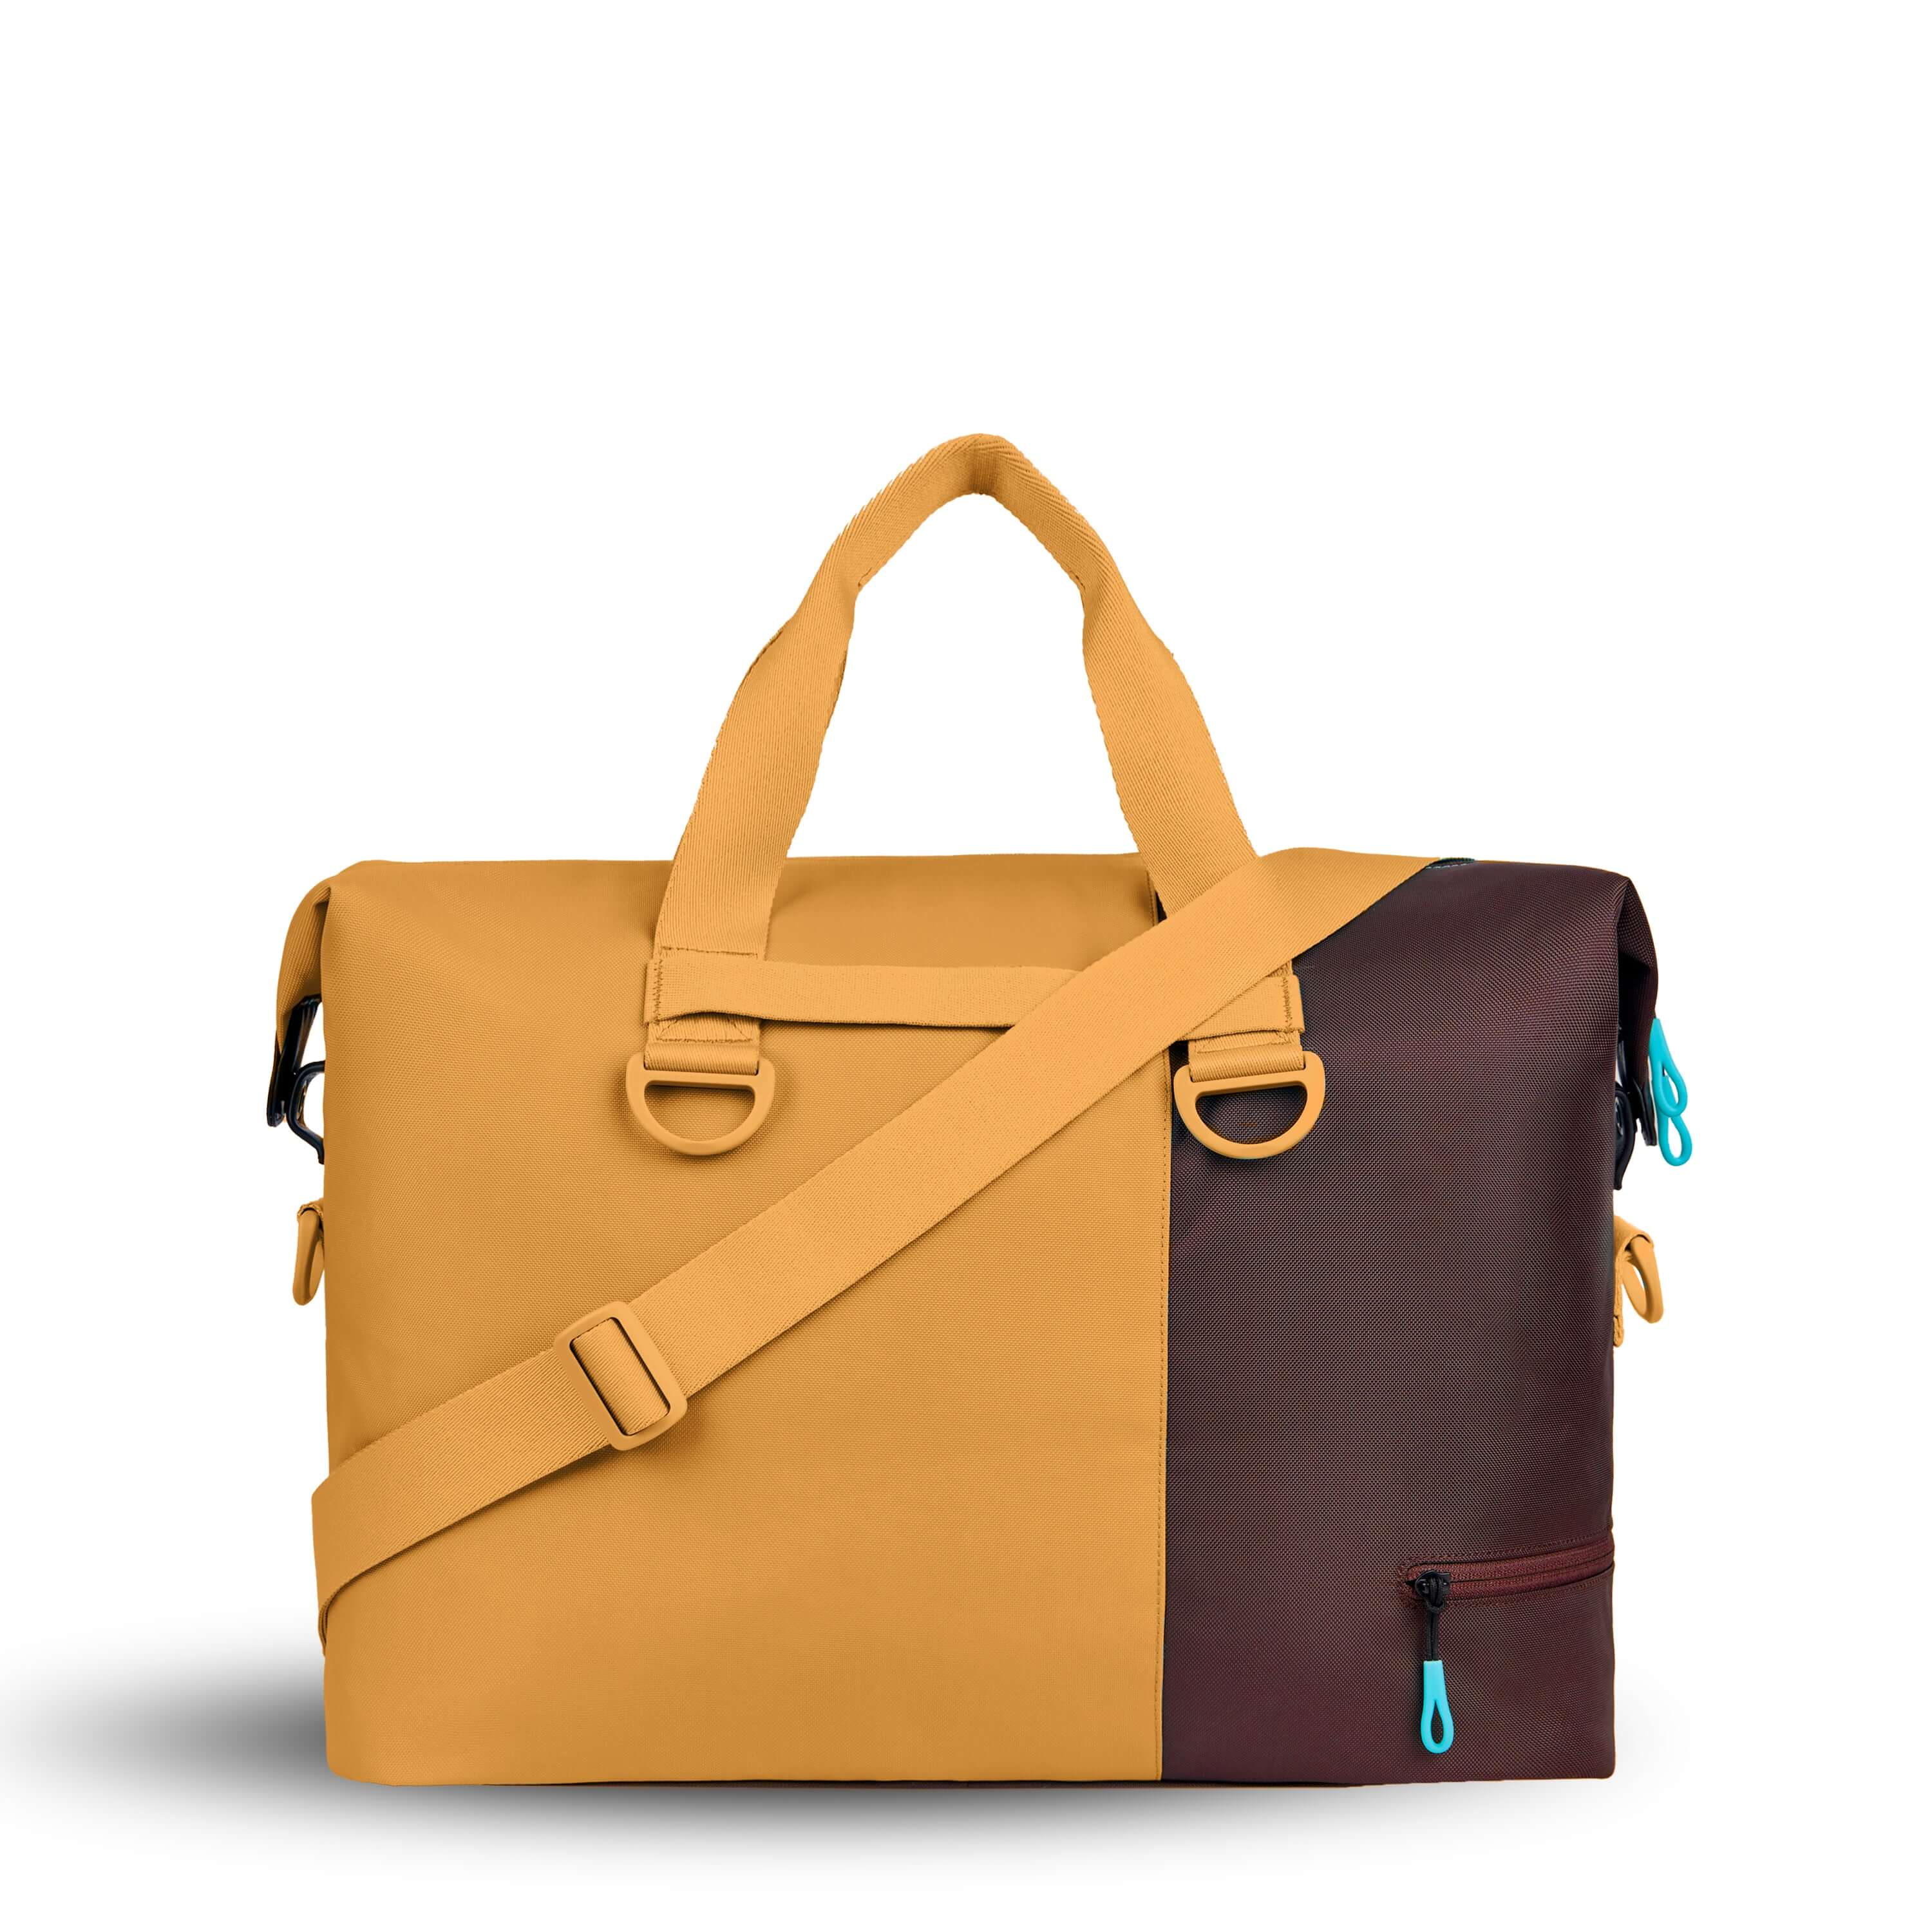 Back view of Sherpani bag, the Sola in Sundial. The bag is two-toned in burnt yellow and brown. Easy-pull zippers are accented in aqua. The bag has tote handles and an adjustable/detachable crossbody strap.